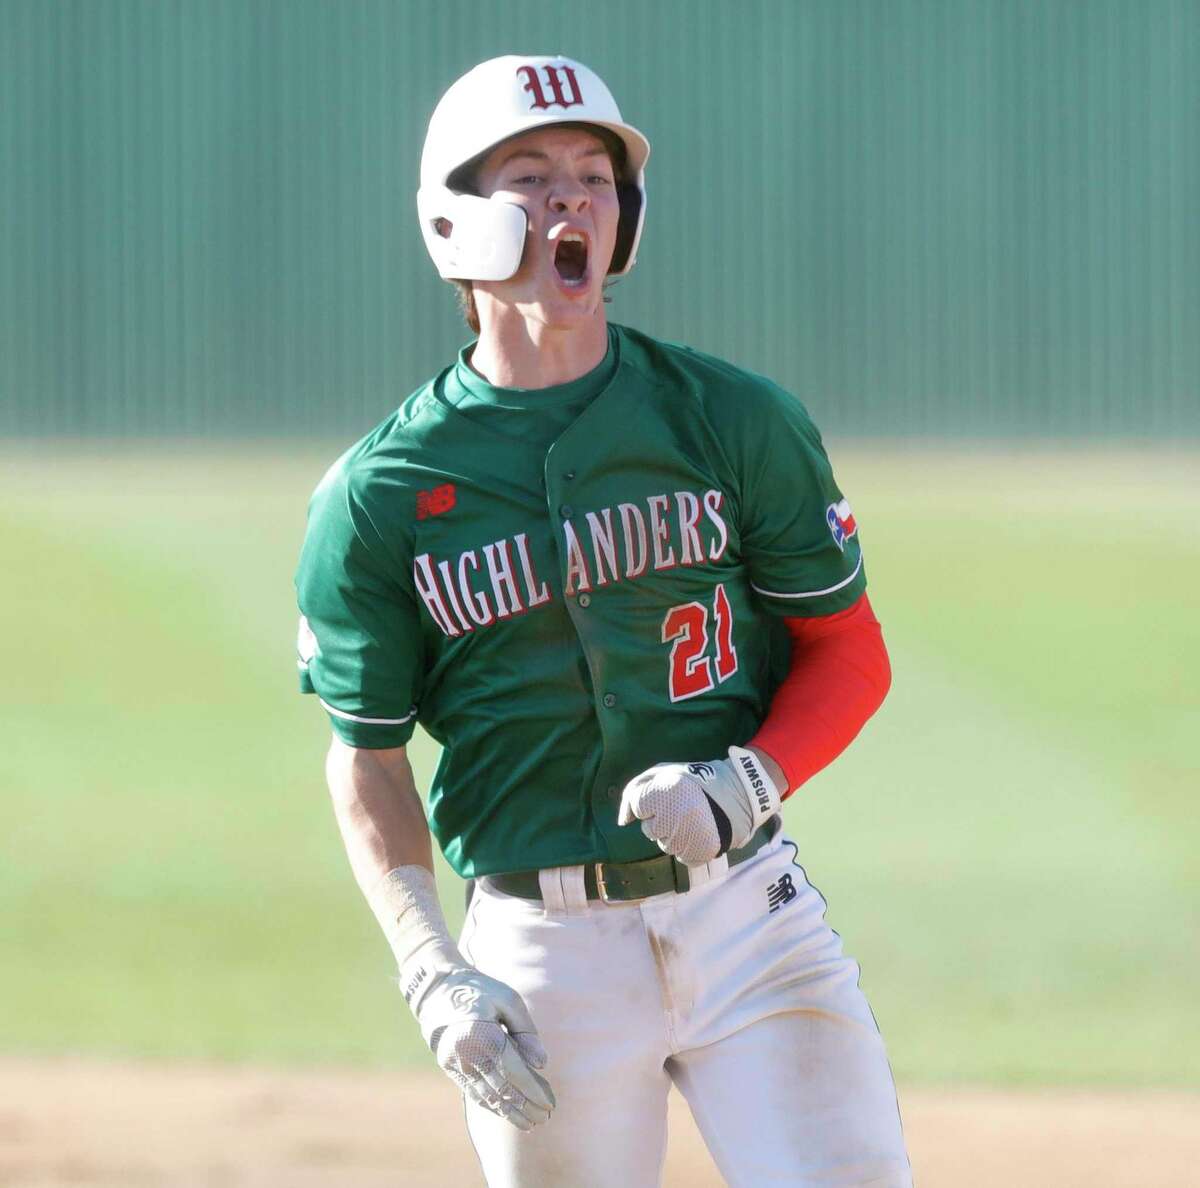 Brayden Sharp #21 of The Woodlands reacts after hitting an RBI single in the sixth inning of a high school baseball game at Oak Ridge High School, March 16, 2022.